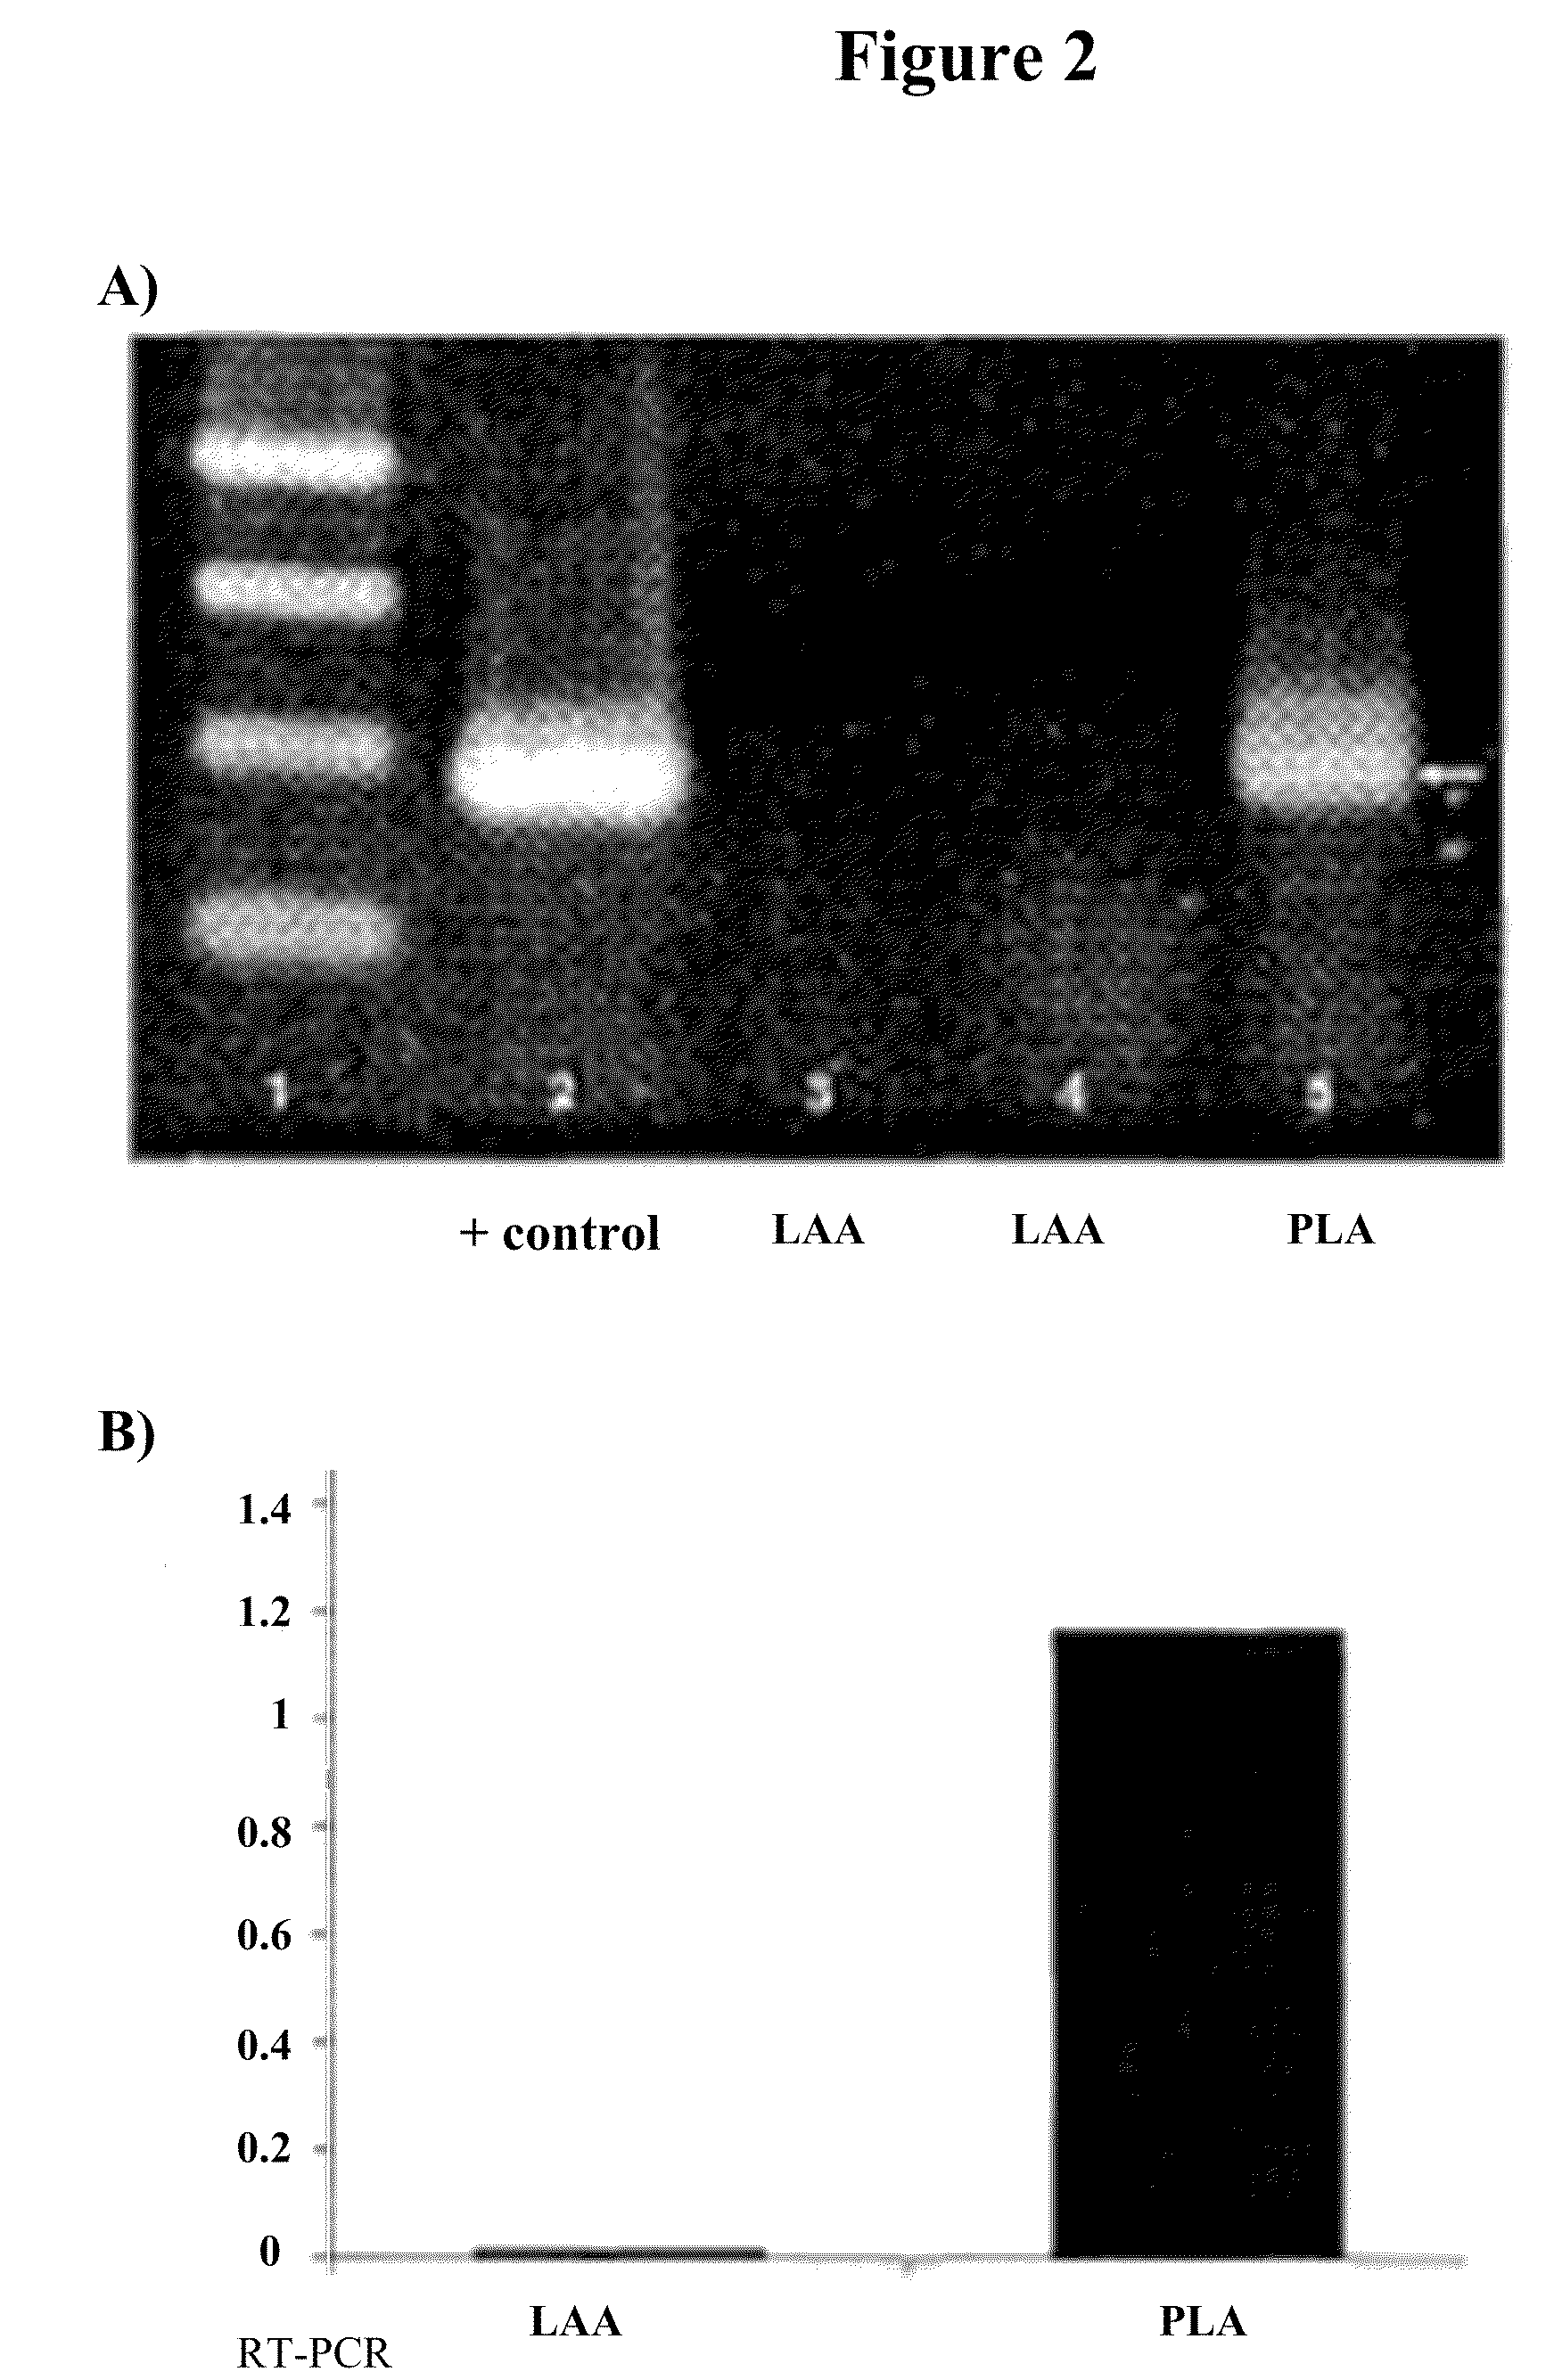 Devices for material delivery, electroporation, and monitoring electrophysiological activity